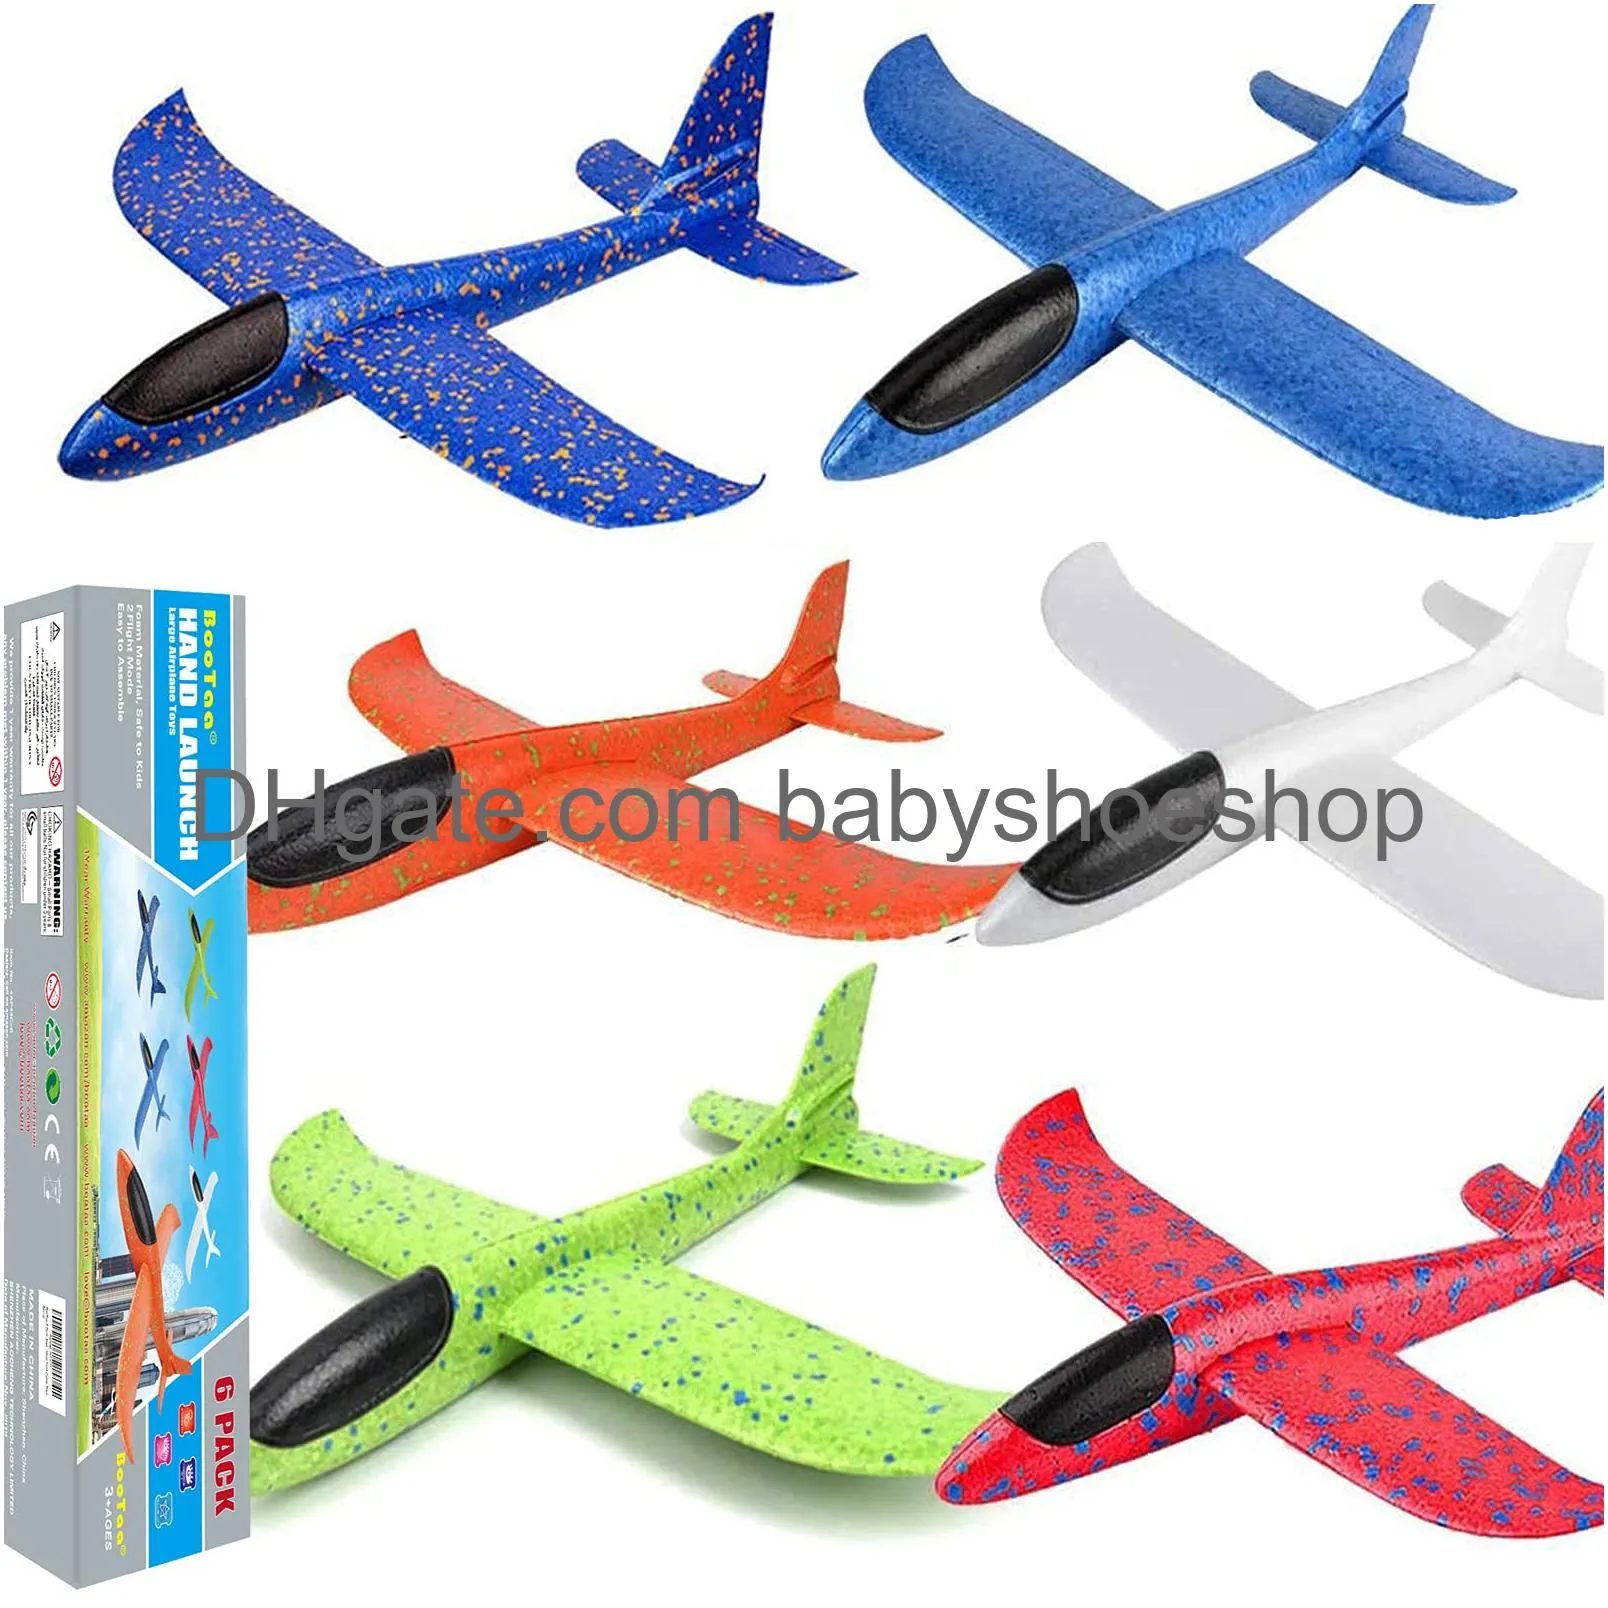 bootaa airplane toys 17.5 large throwing foam plane 2 flight mode foam gliders birthday gifts for kids 3 4 5 6 7 8 9 10 11 12 year old boys kids girls outdoor yard family game toys